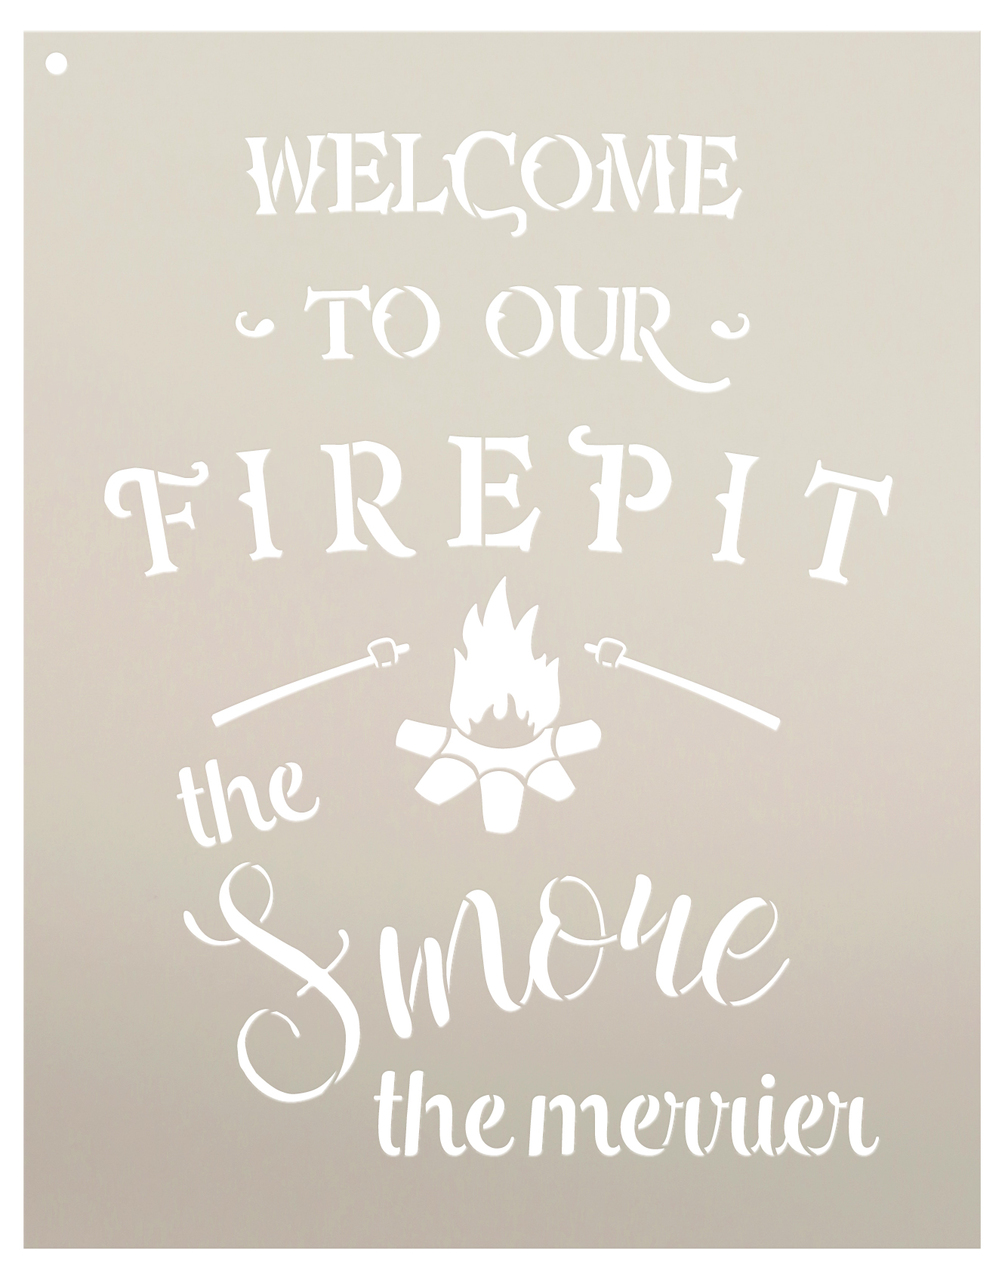 Welcome To Our Firepit Stencil - the Smore the Merrier by StudioR12 -  Fall Word Art - 19" x 24" - STCL2236_4